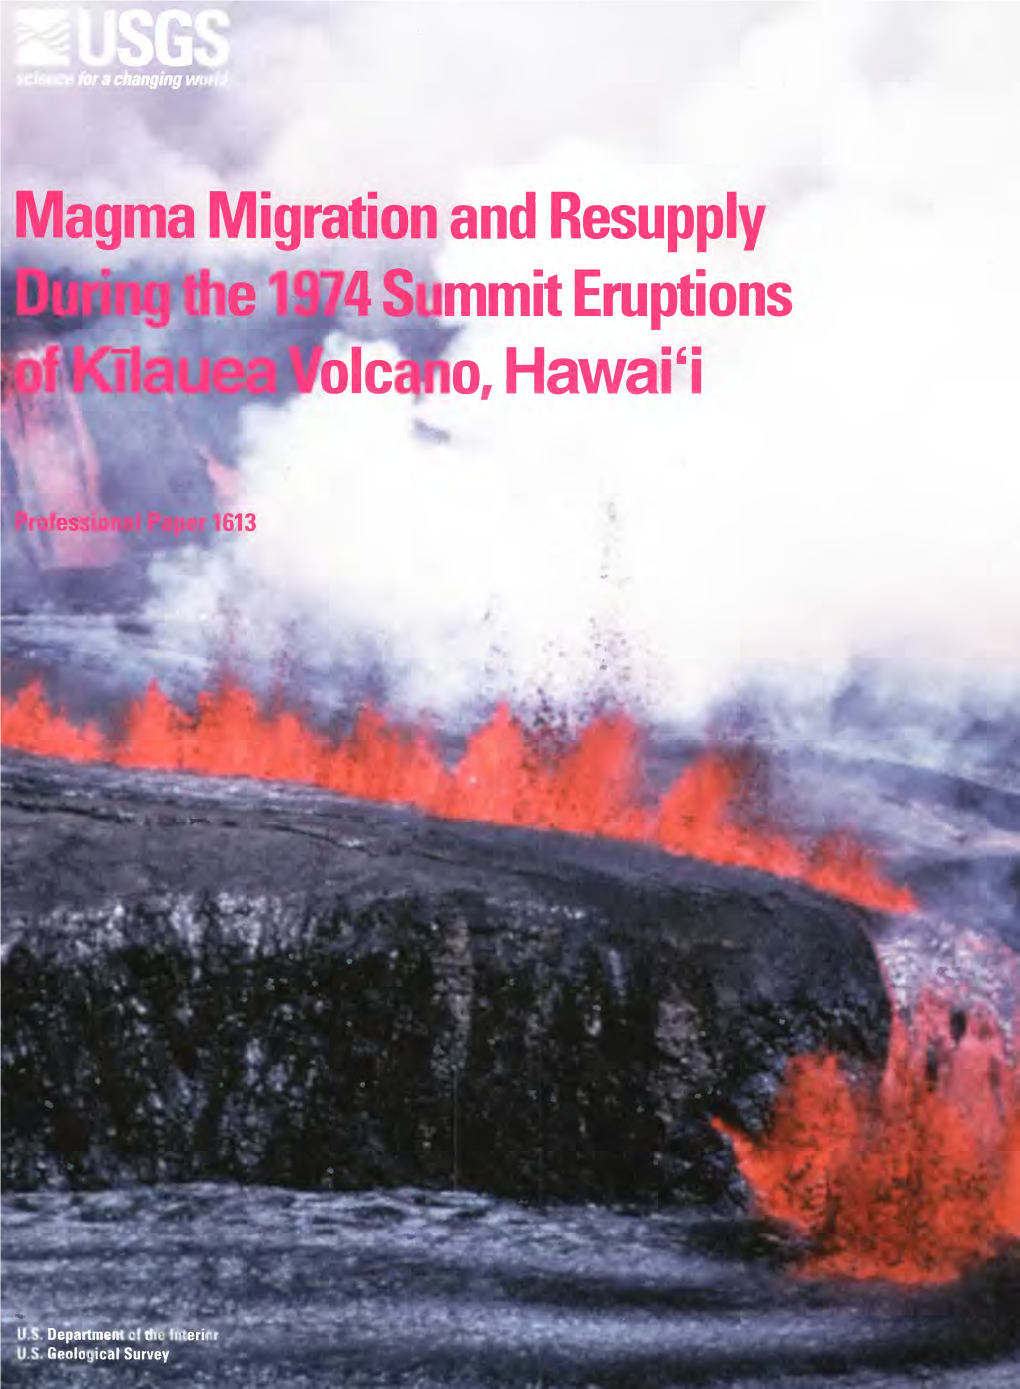 Magma Migration and Resupply During the 1974 Summit Eruptions of Kllauea Volcano, Hawai'i